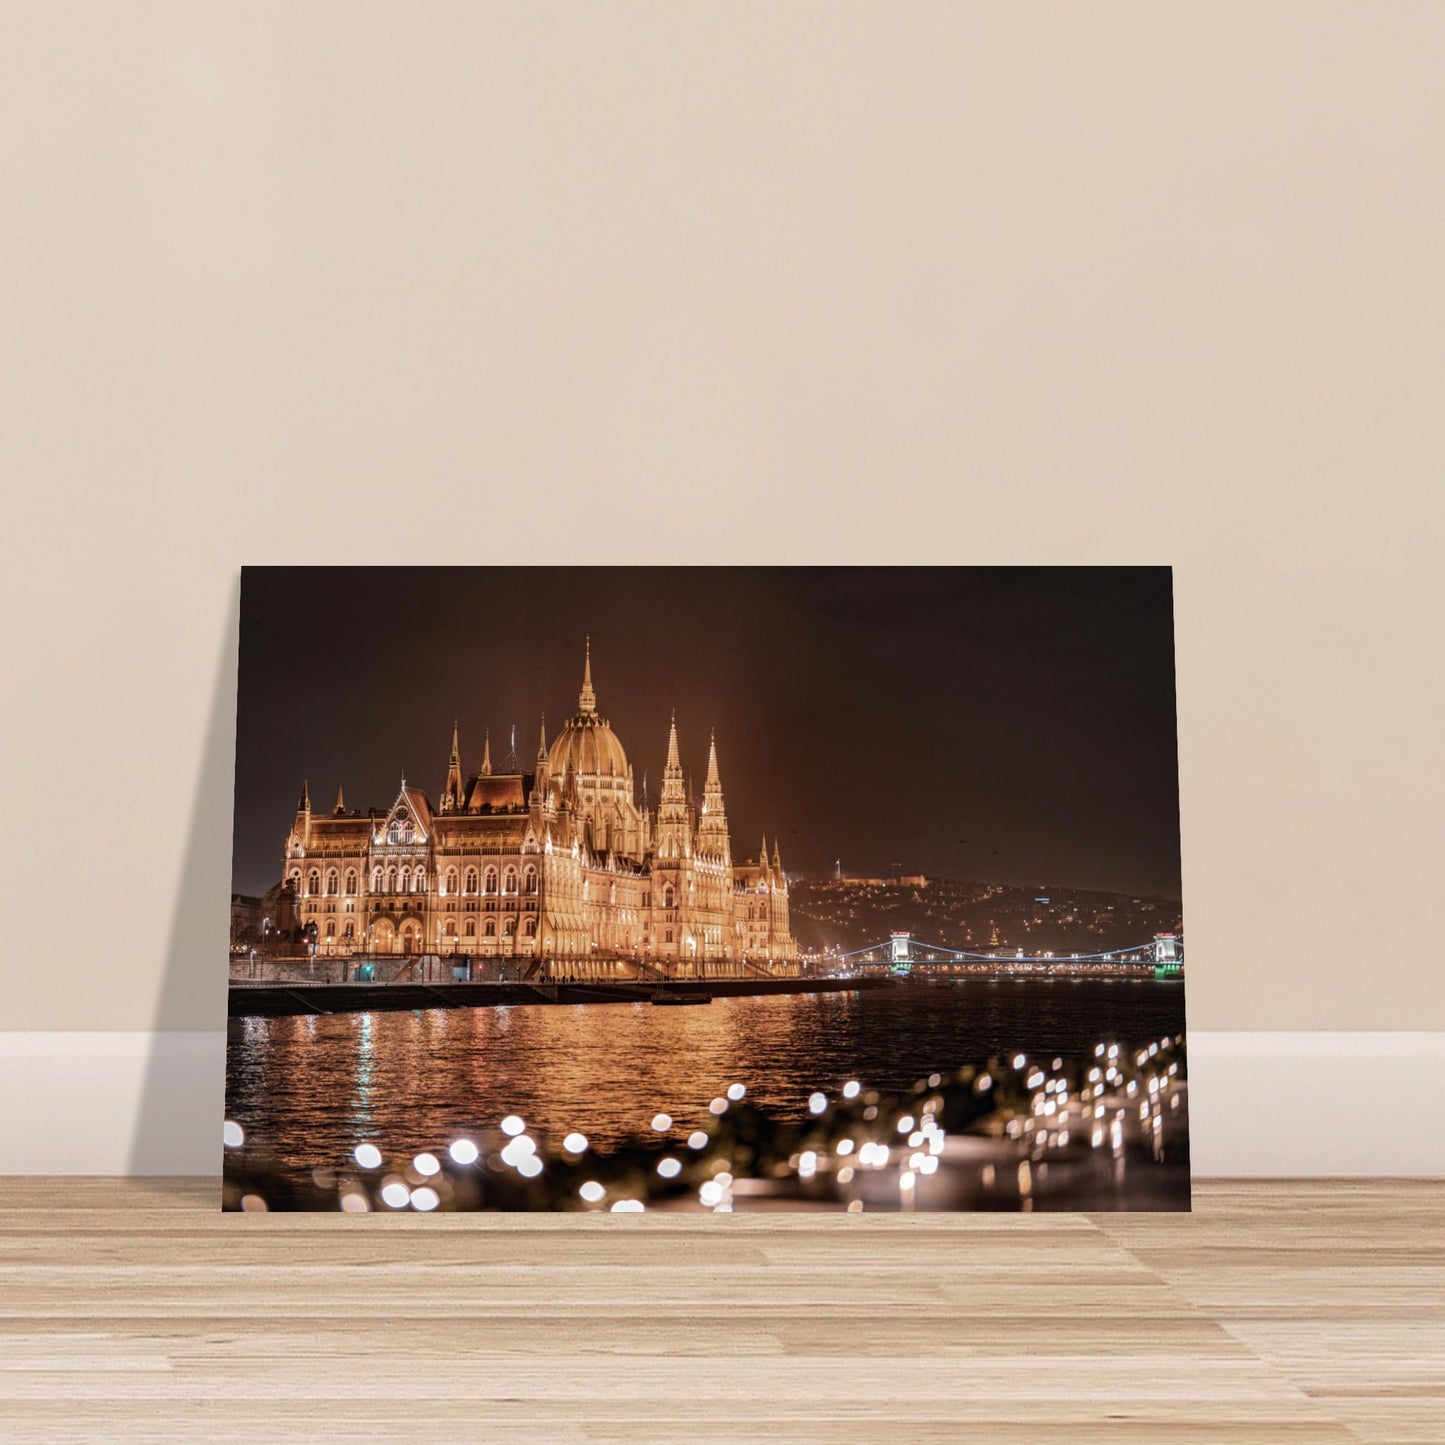 Danube Series - Hungarian Parliament Building (Gallery-Wrapped Canvas or Aluminum Print)